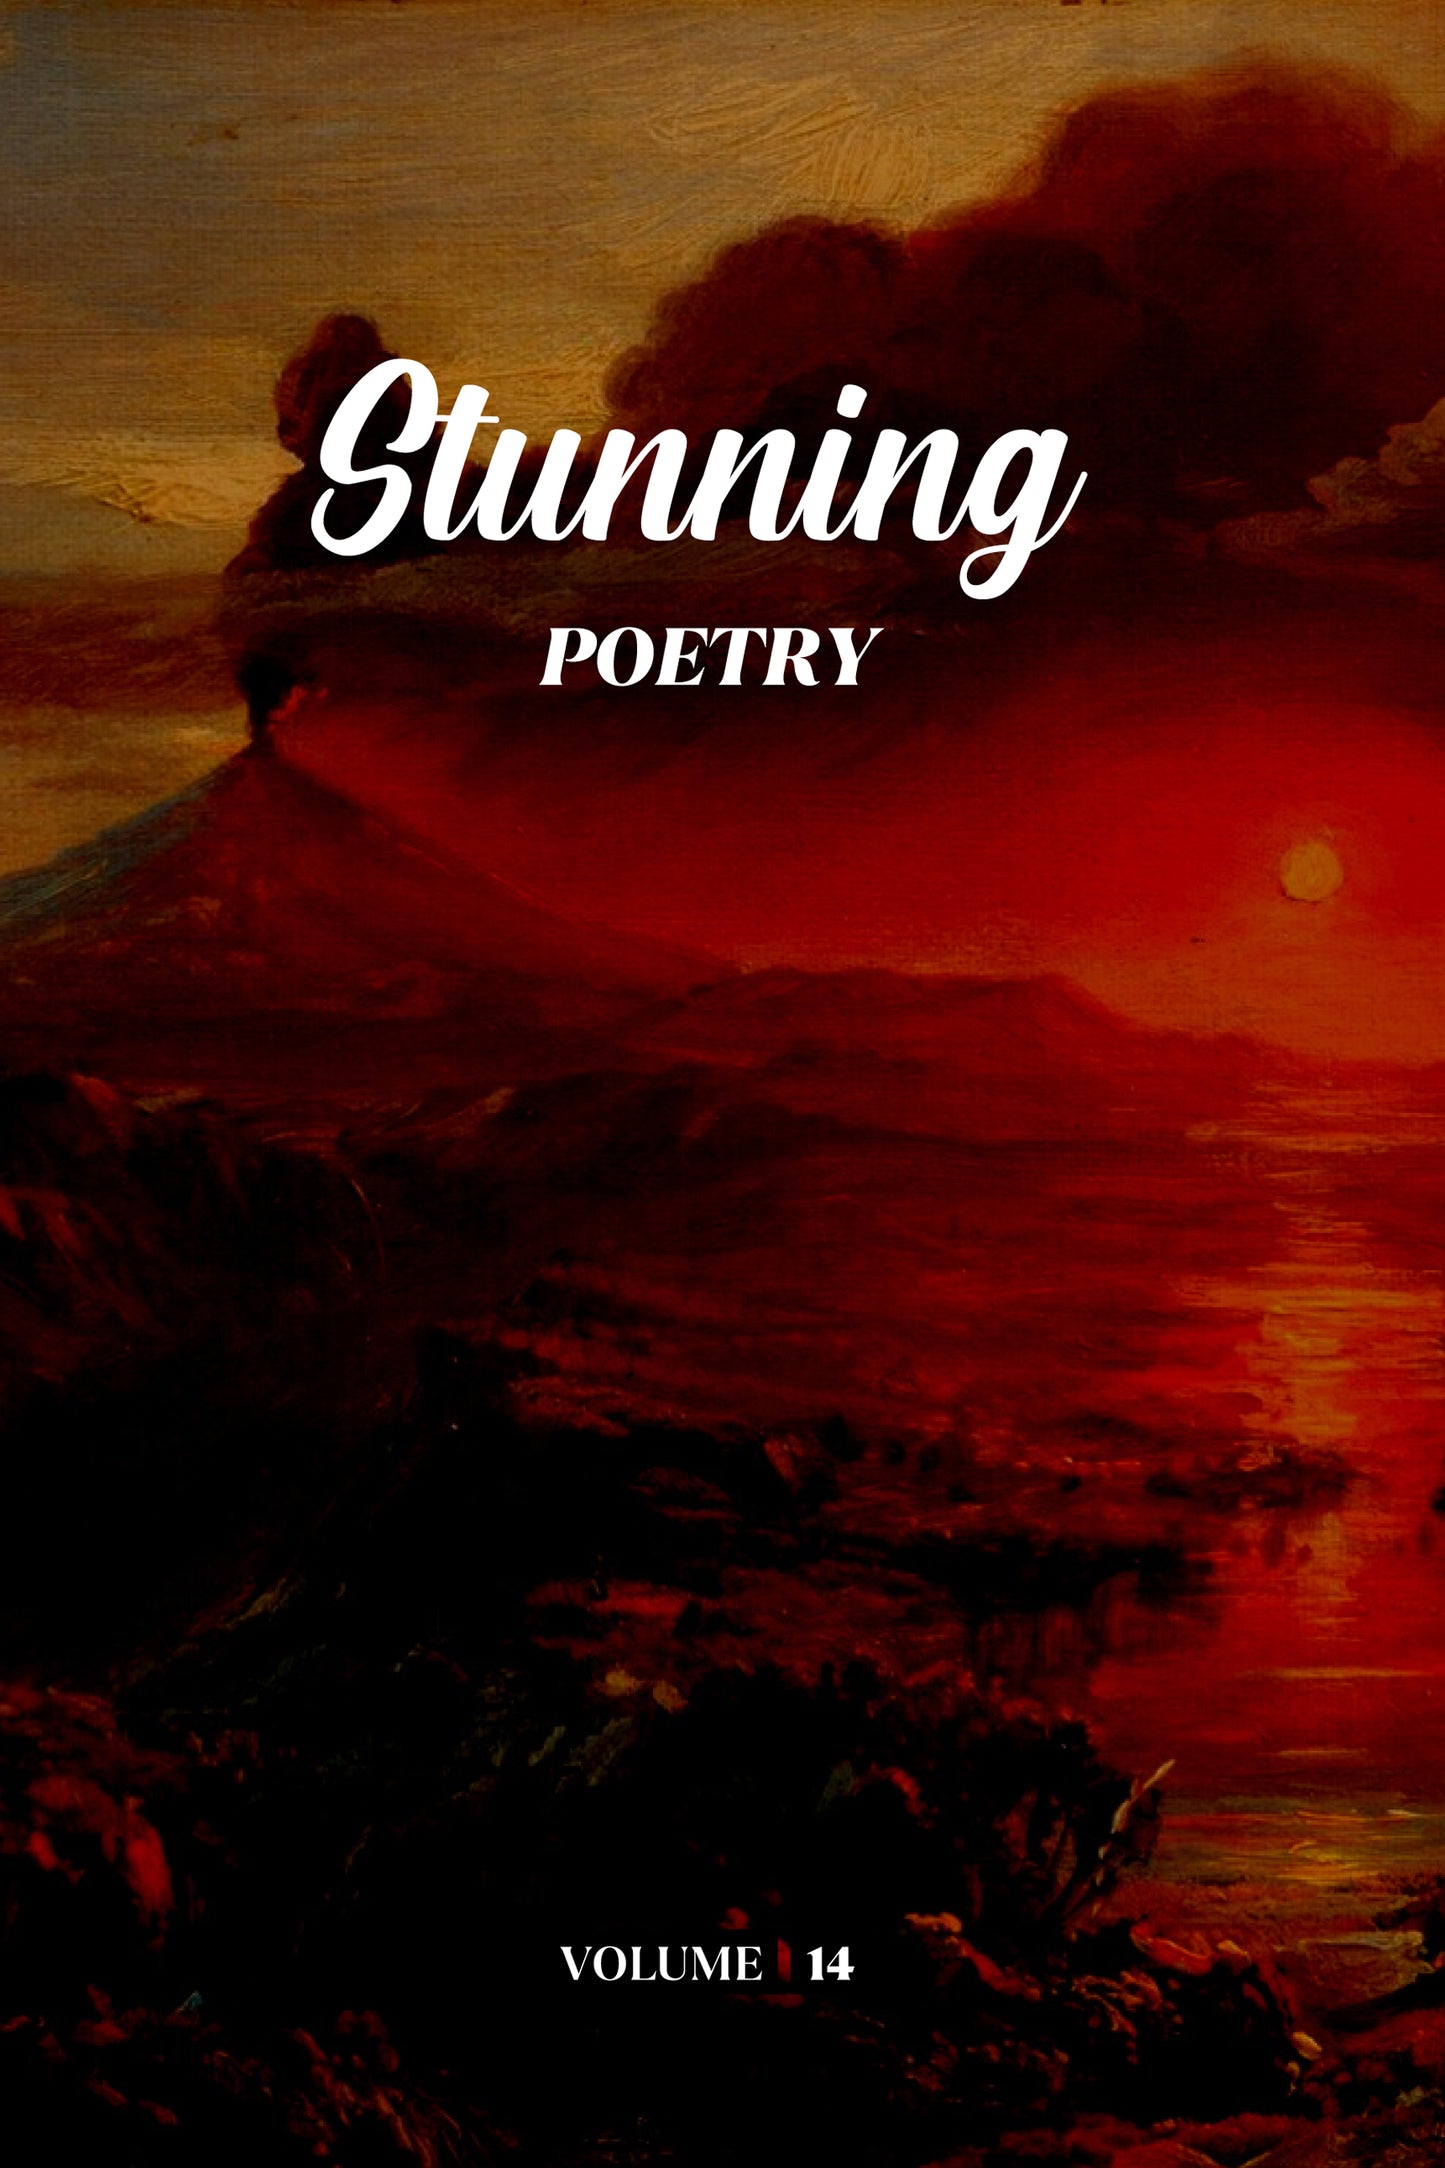 Stunning Poetry (Volume 14) - Physical Book